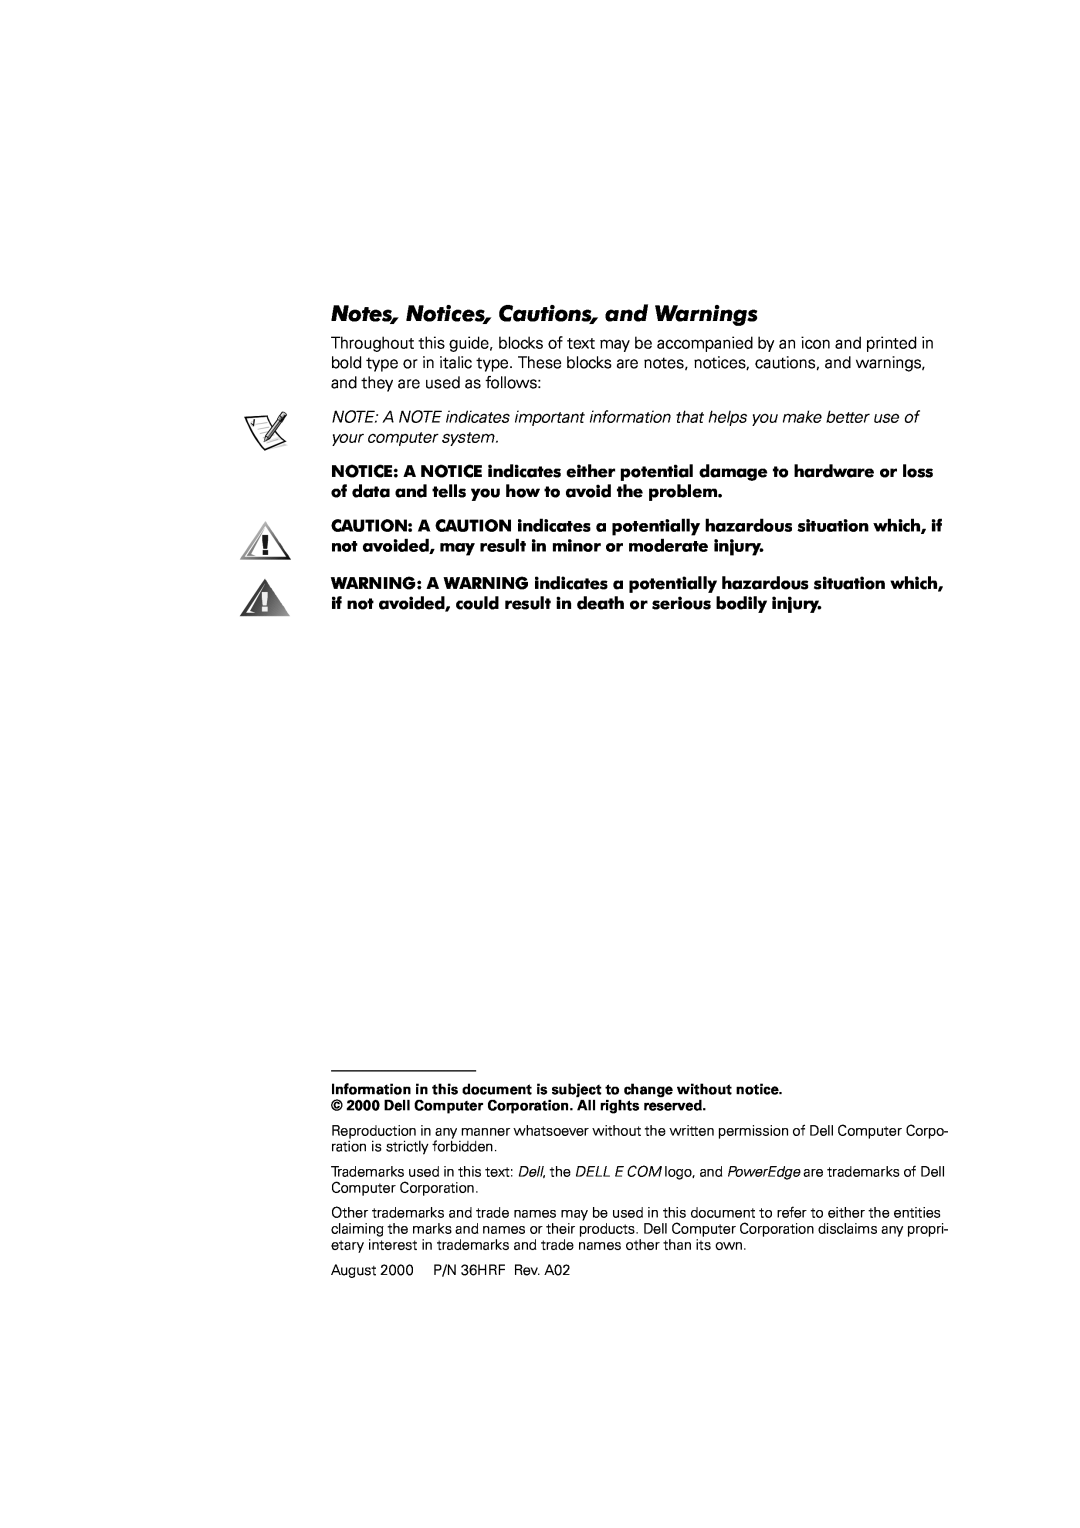 Dell 2400 manual Notes, Notices, Cautions, and Warnings 